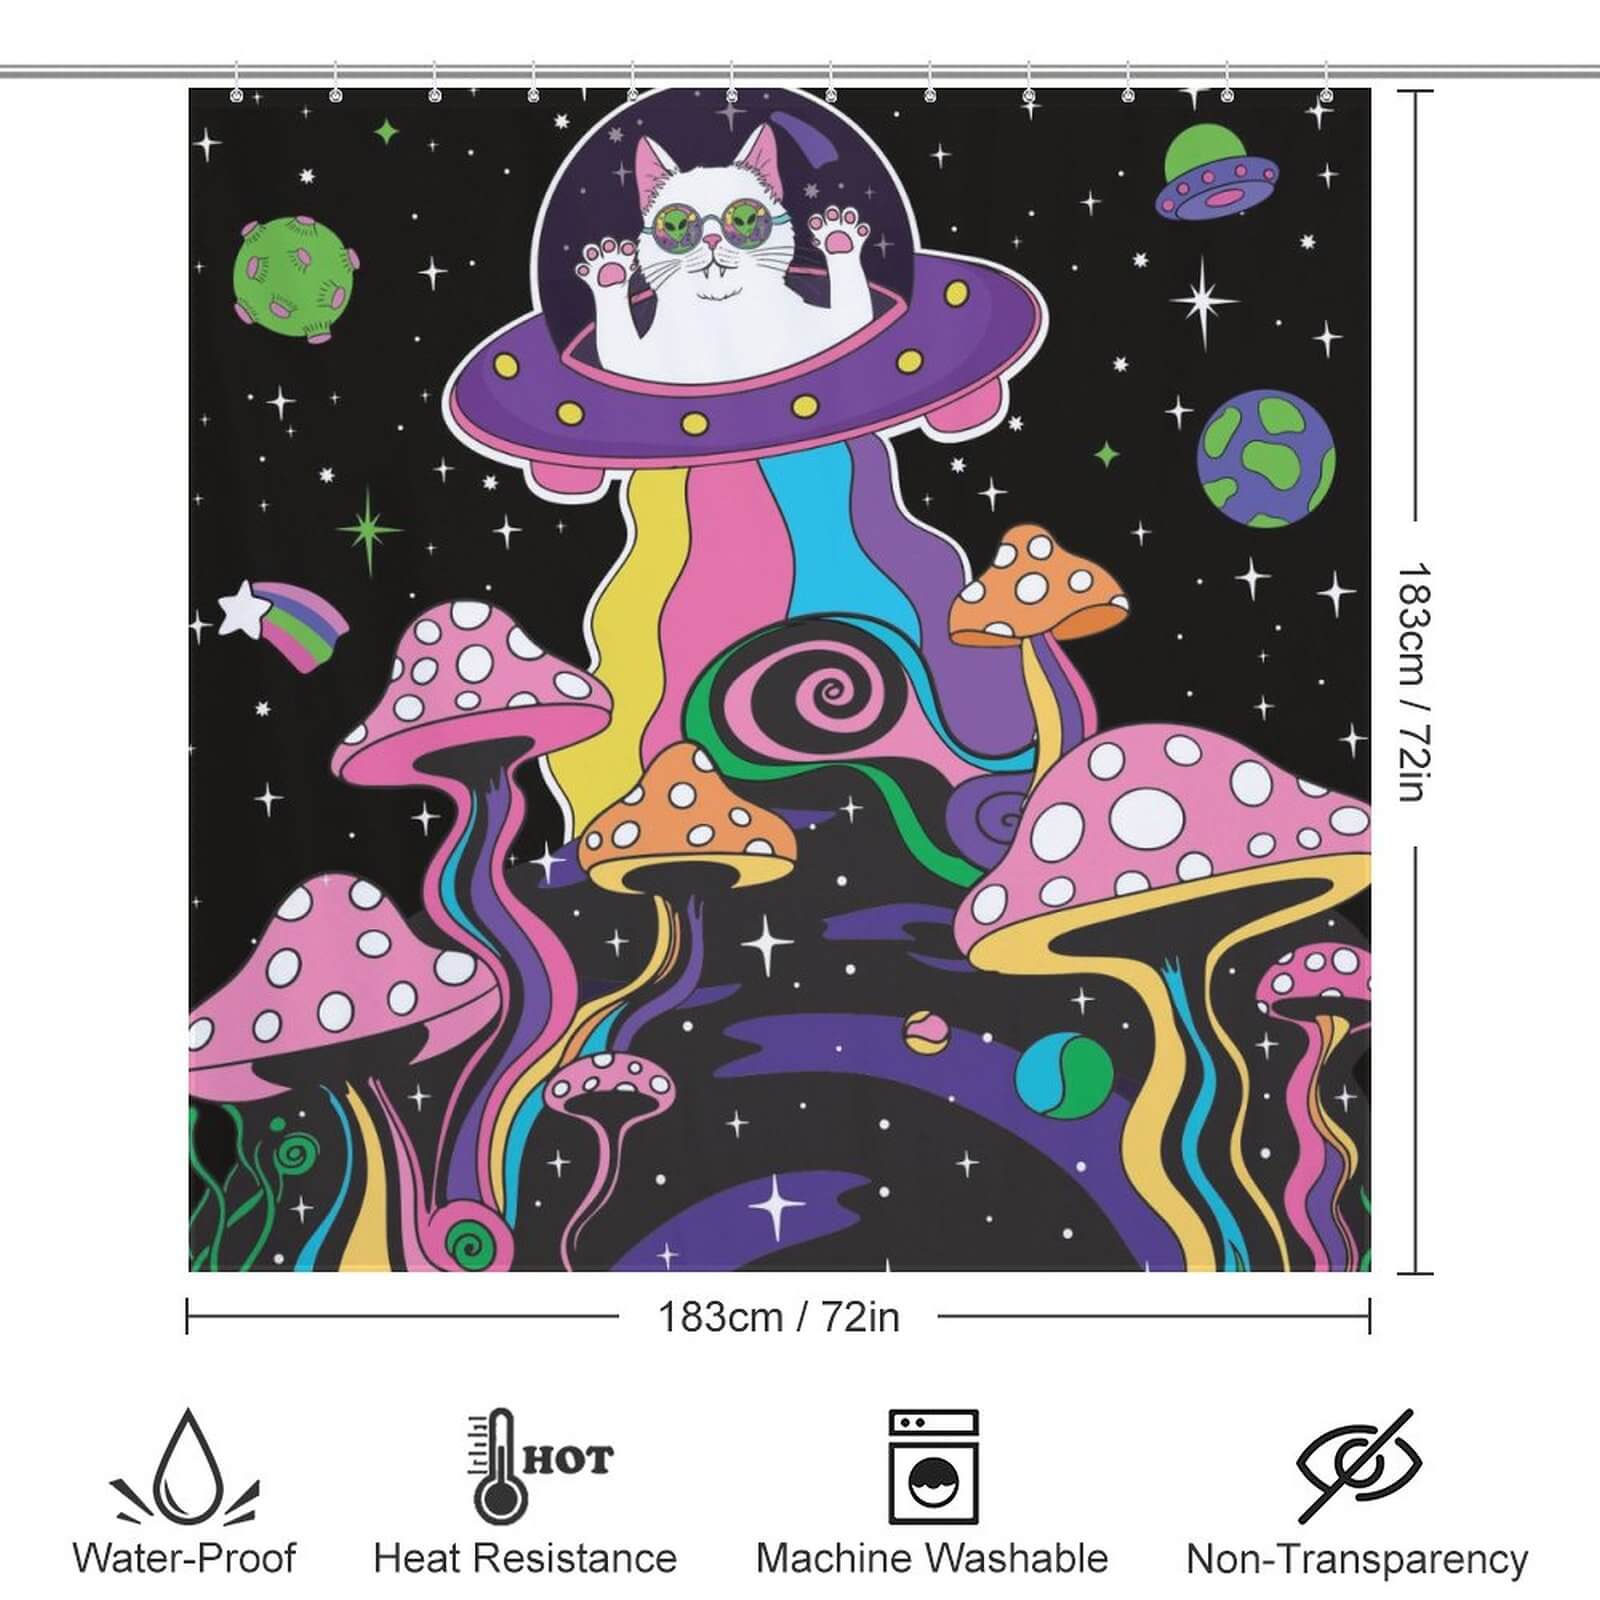 A Mushroom Trippy Shower Curtain-Cottoncat featuring a cat in space amongst a backdrop of mushrooms, perfect for adding a touch of whimsy to your bathroom.